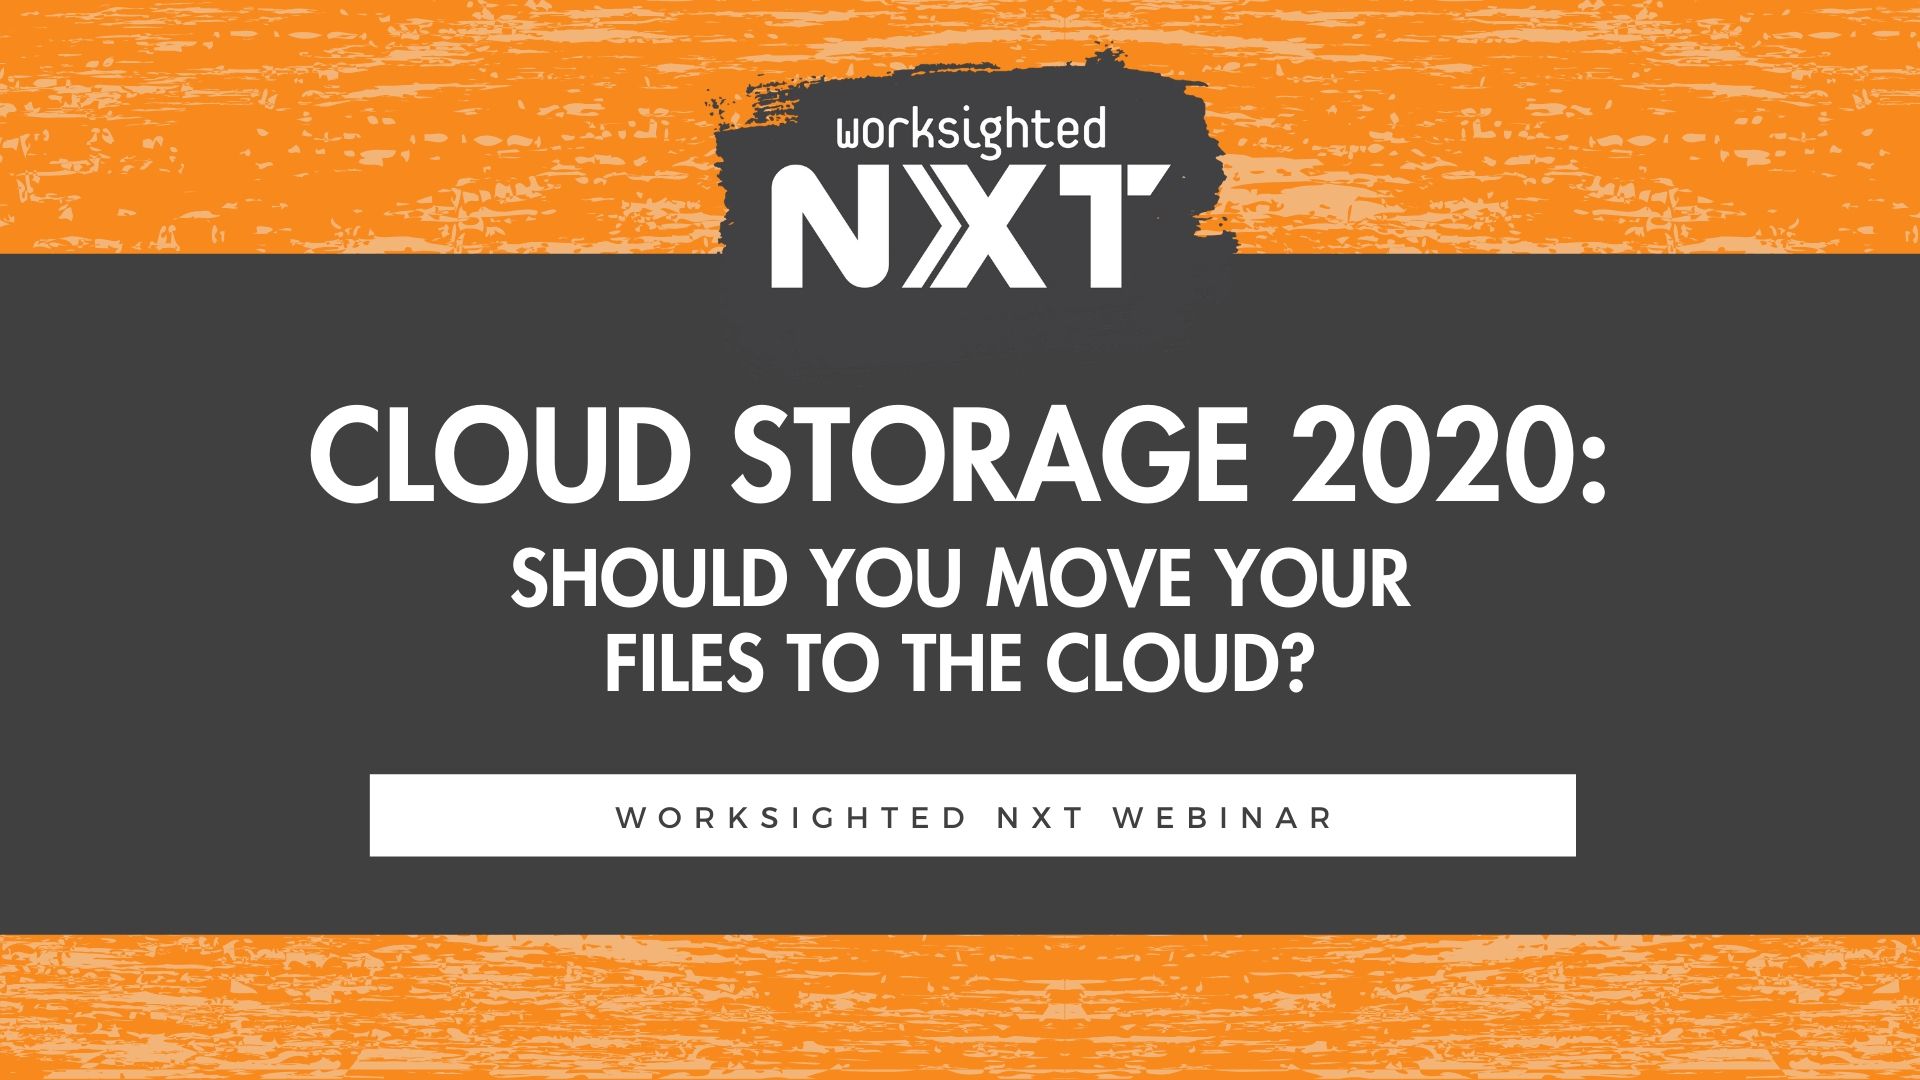 Worksighted NXT Webinar- Cloud Storage 2020: Should You Move Your Files to the Cloud?